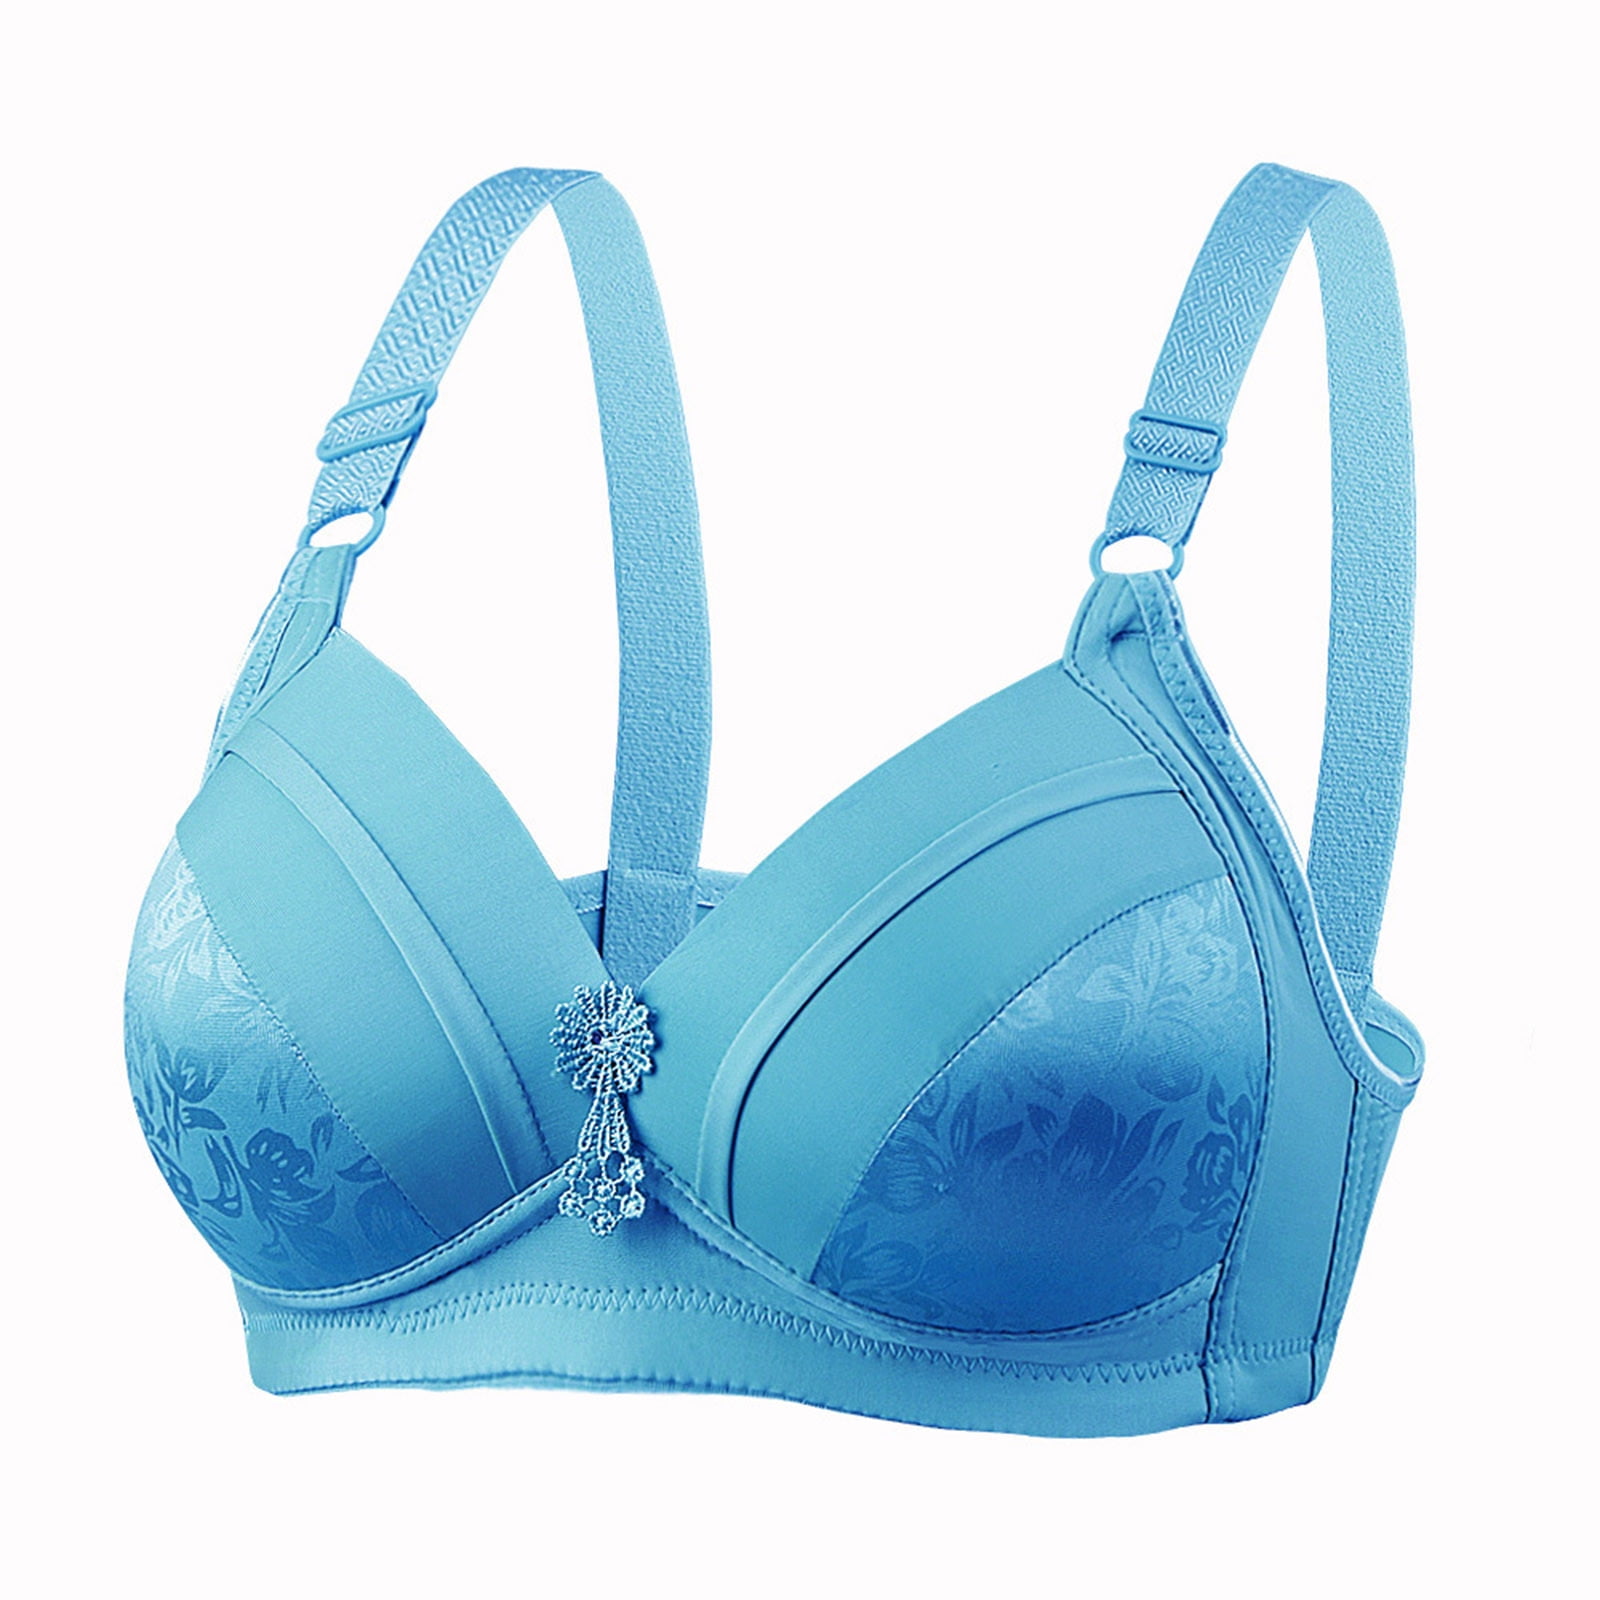 Aueoeo Gifts for Sister, Comfort Bras for Women Woman Sexy